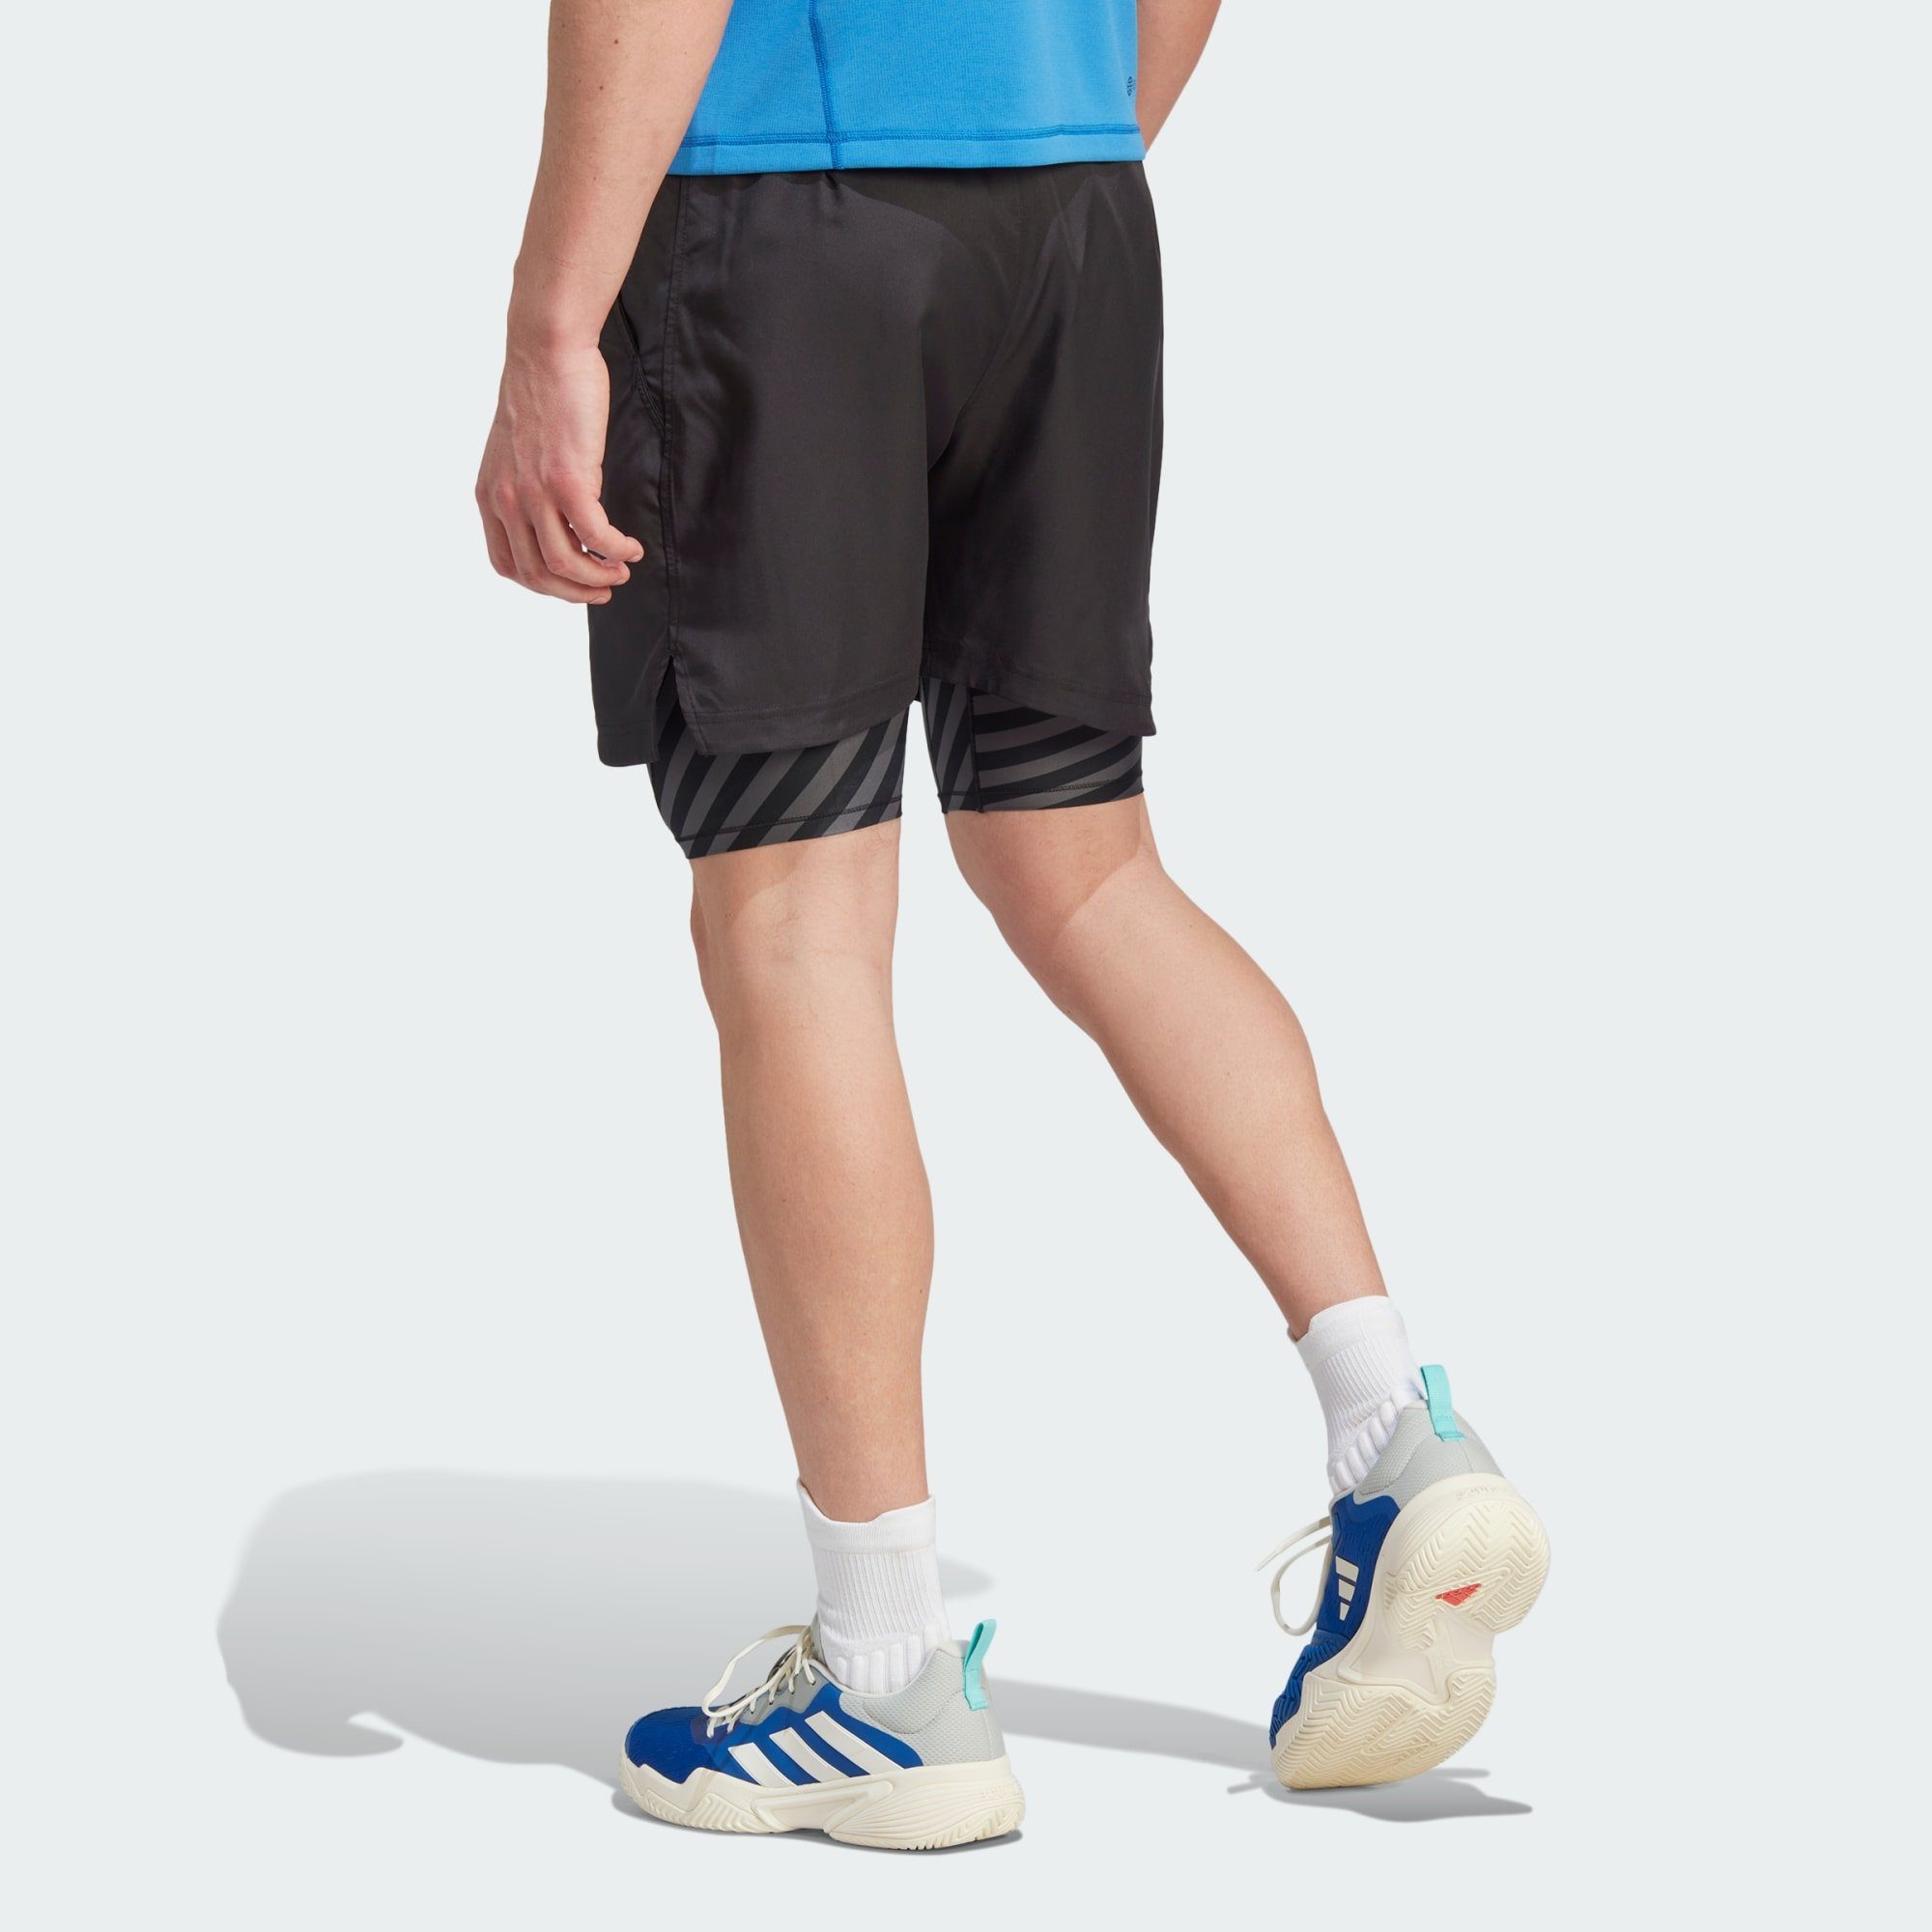 Black AEROREADY SHORTS TWO-IN-ONE PRO Performance TENNIS adidas Funktionsshorts